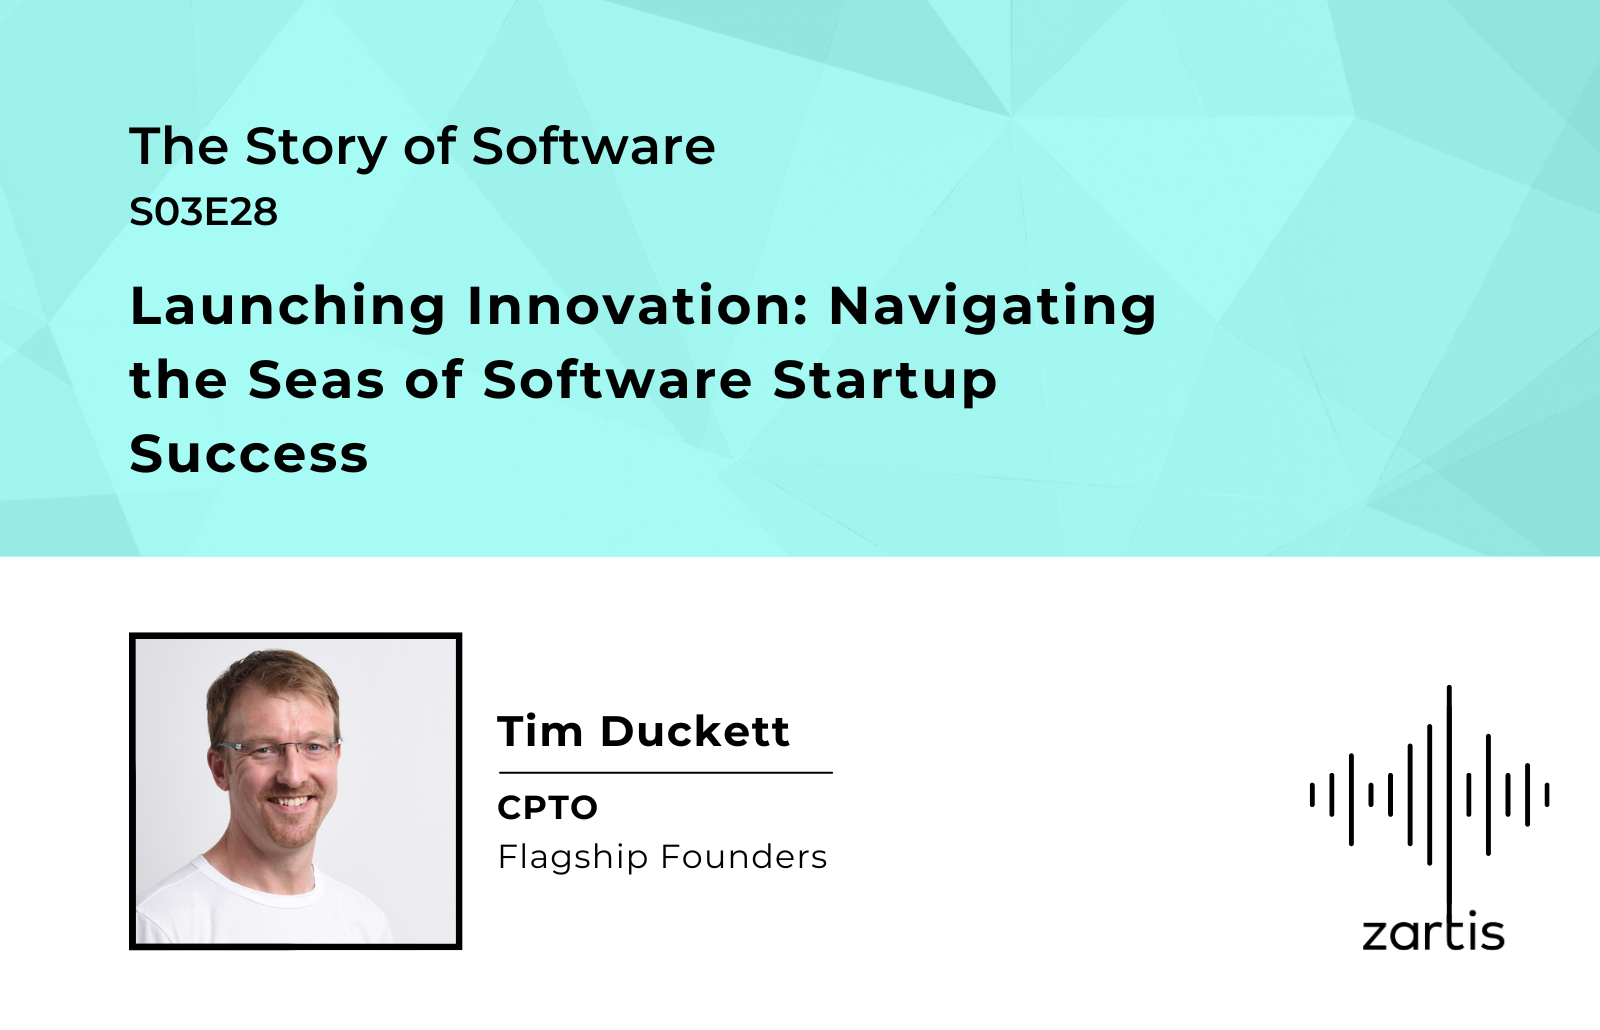 Launching Innovation: Navigating the Seas of Software Startup Success – Story Of Software S03E28